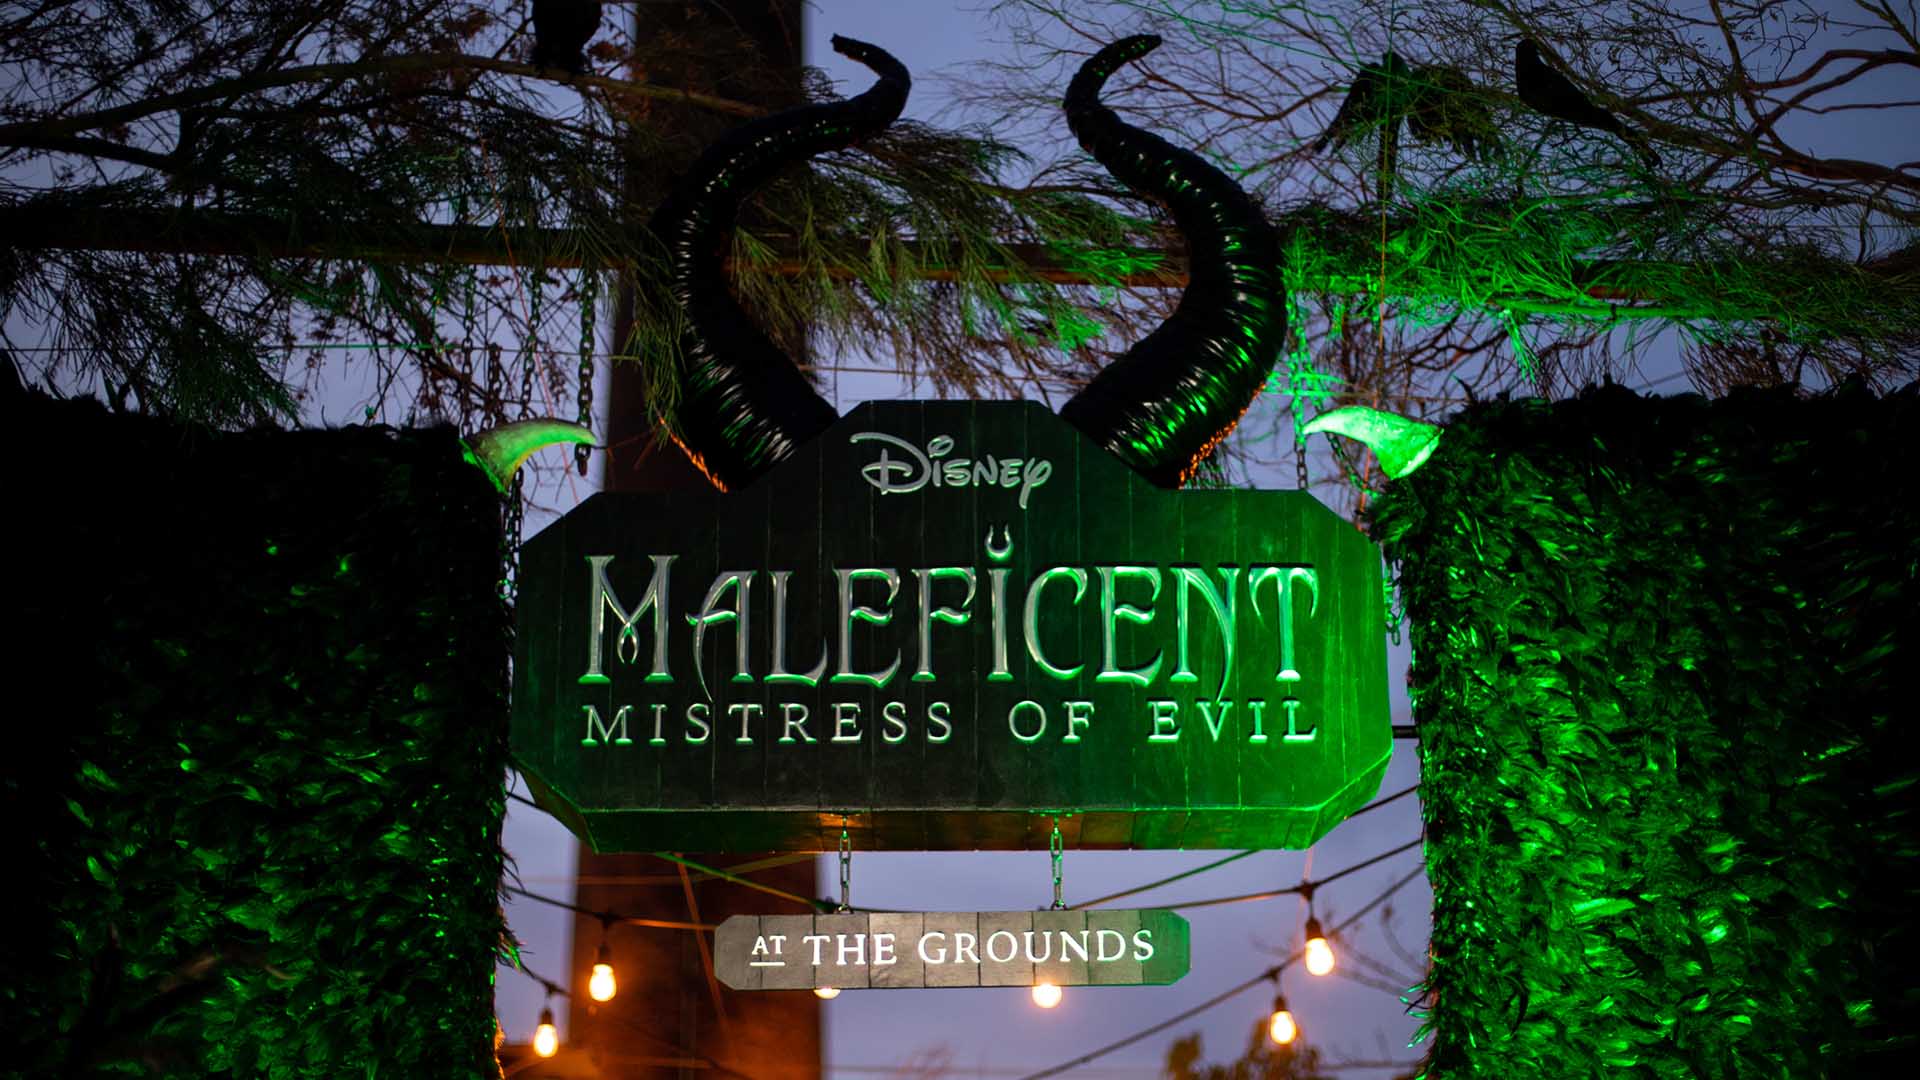 'Maleficent: Mistress of Evil' at The Grounds